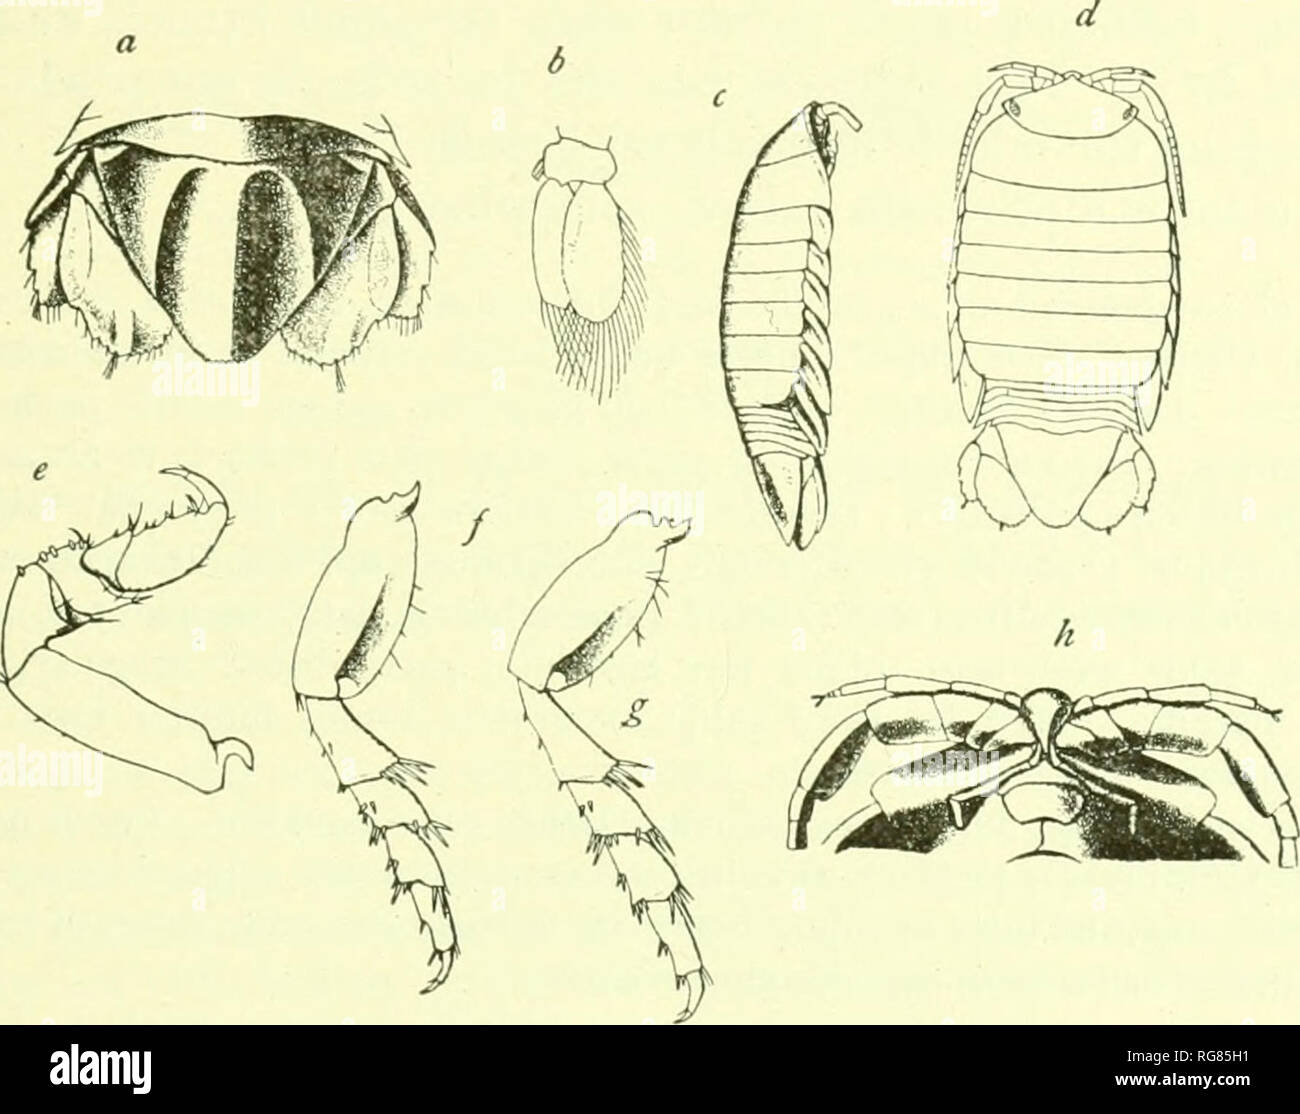 . Bulletin - United States National Museum. Science. ISOPODS OF NORTH AMERICA. 85 The mandibles have a wide ciittino- edge. The maxillipeds are almost as in C. japonica. The segments of the thorax arc suhequal in length; the first seg- ment is somewliat shorter than the head and somewhat longer than the Hfth segment; the sixth and seven seg-ments are subequal in length and ornamented near the antei'ior margin with a transverse furrow. The epiniera are large, postei'iorly produced, and oblicpiely carinated (the carina terminating in a fork, very wide particularl}' in the posterior epimera, and  Stock Photo